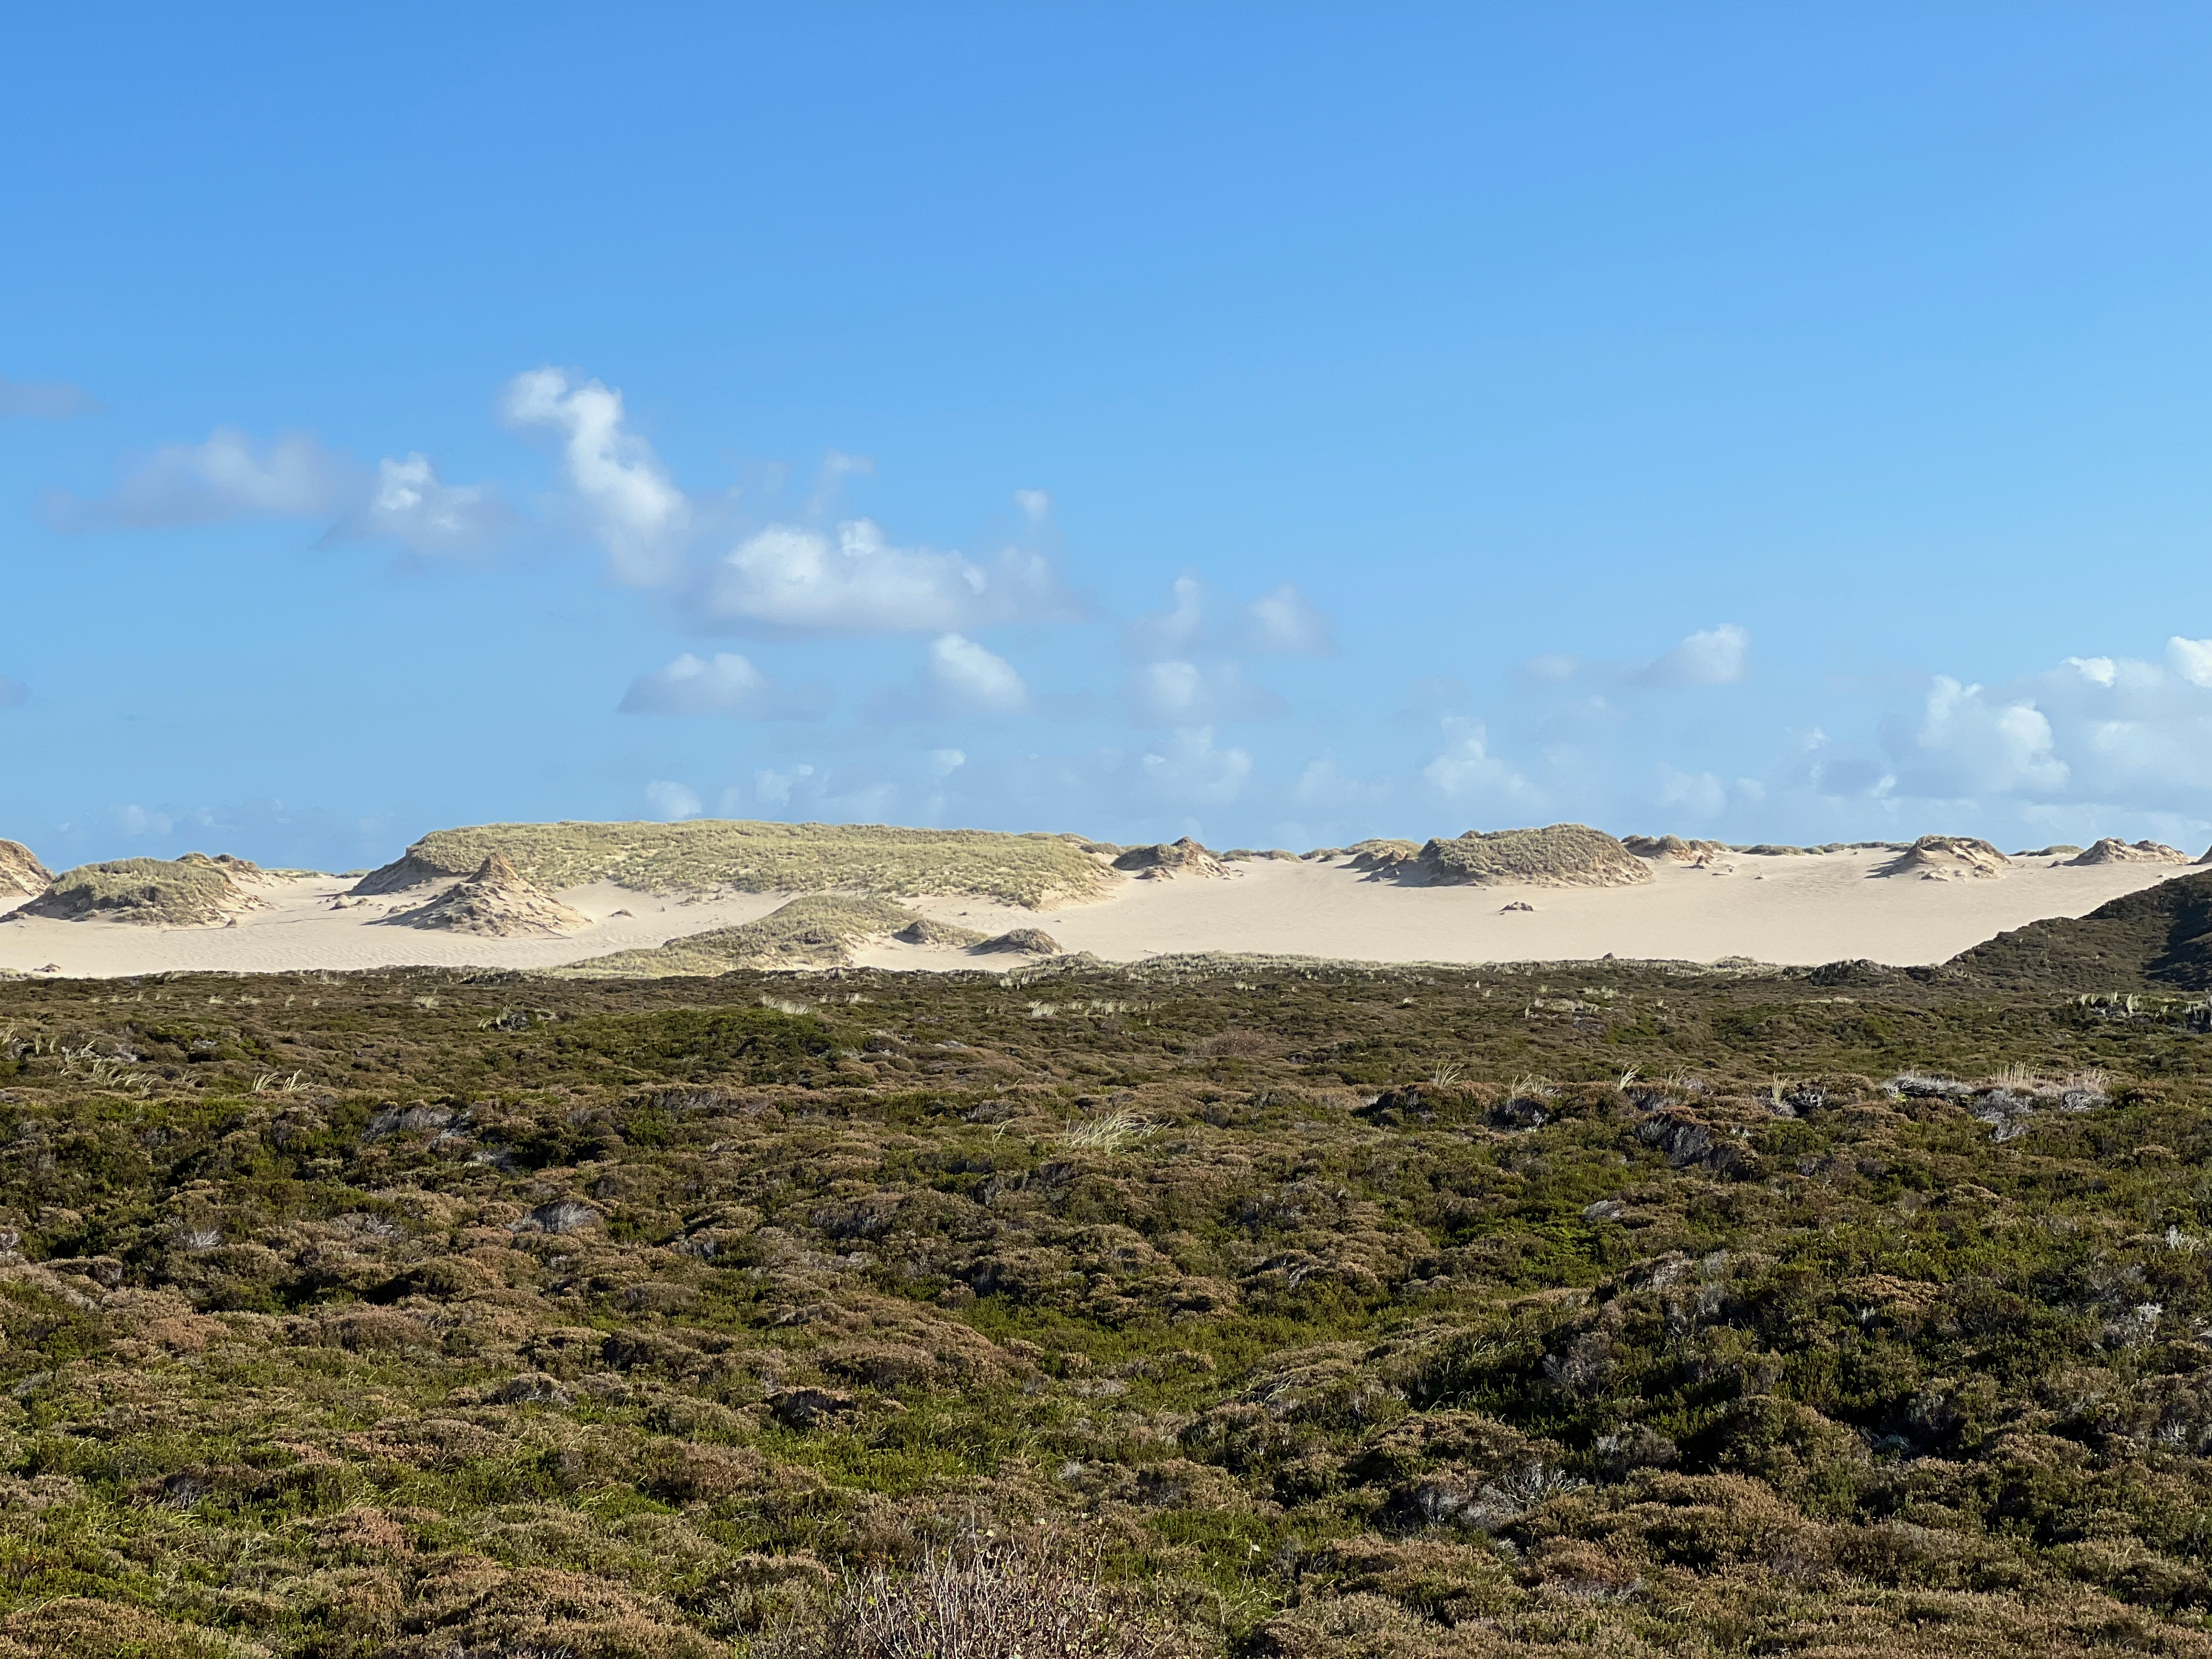 View of the shifting sand dune from the cycle path